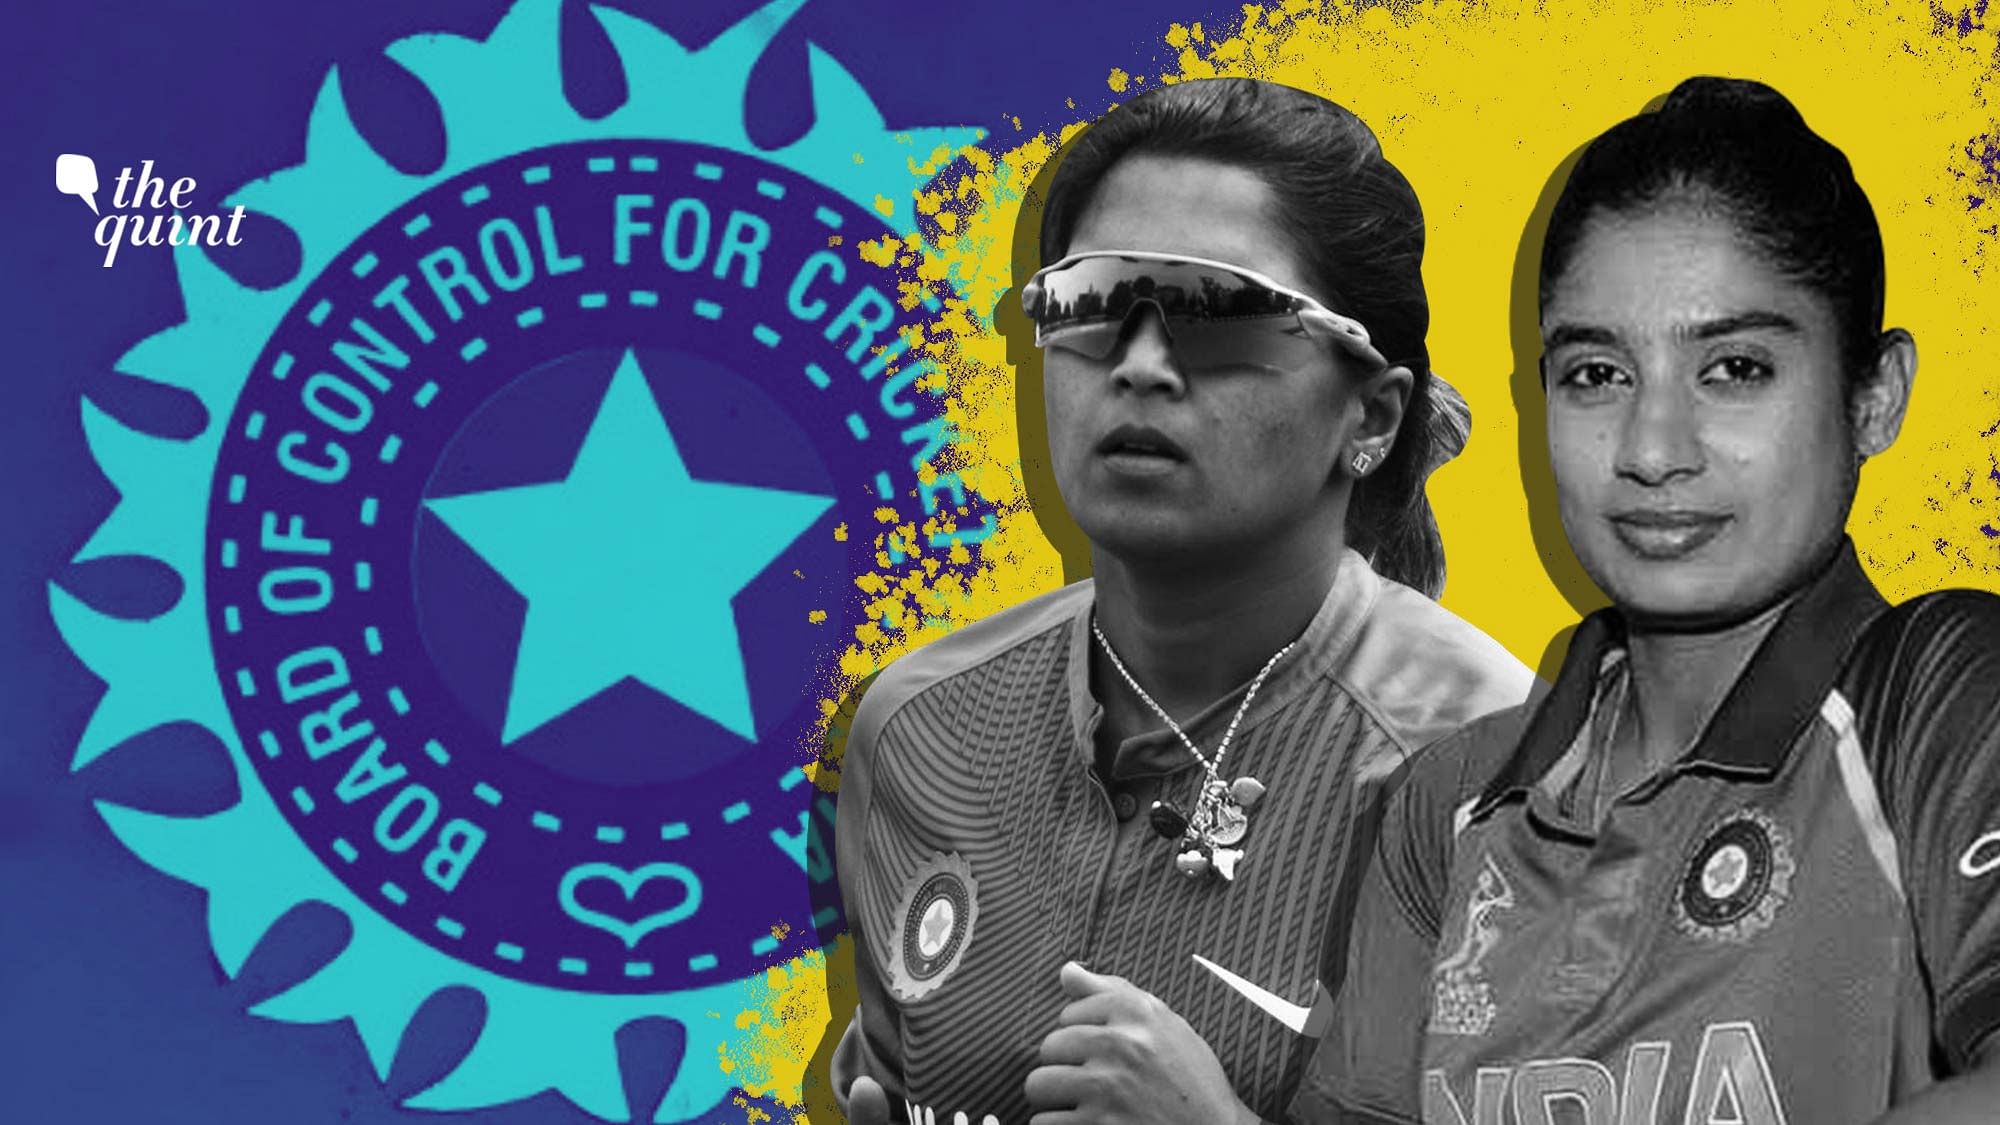 Ramesh Powar was recently appointed as coach of the Indian Women’s team.